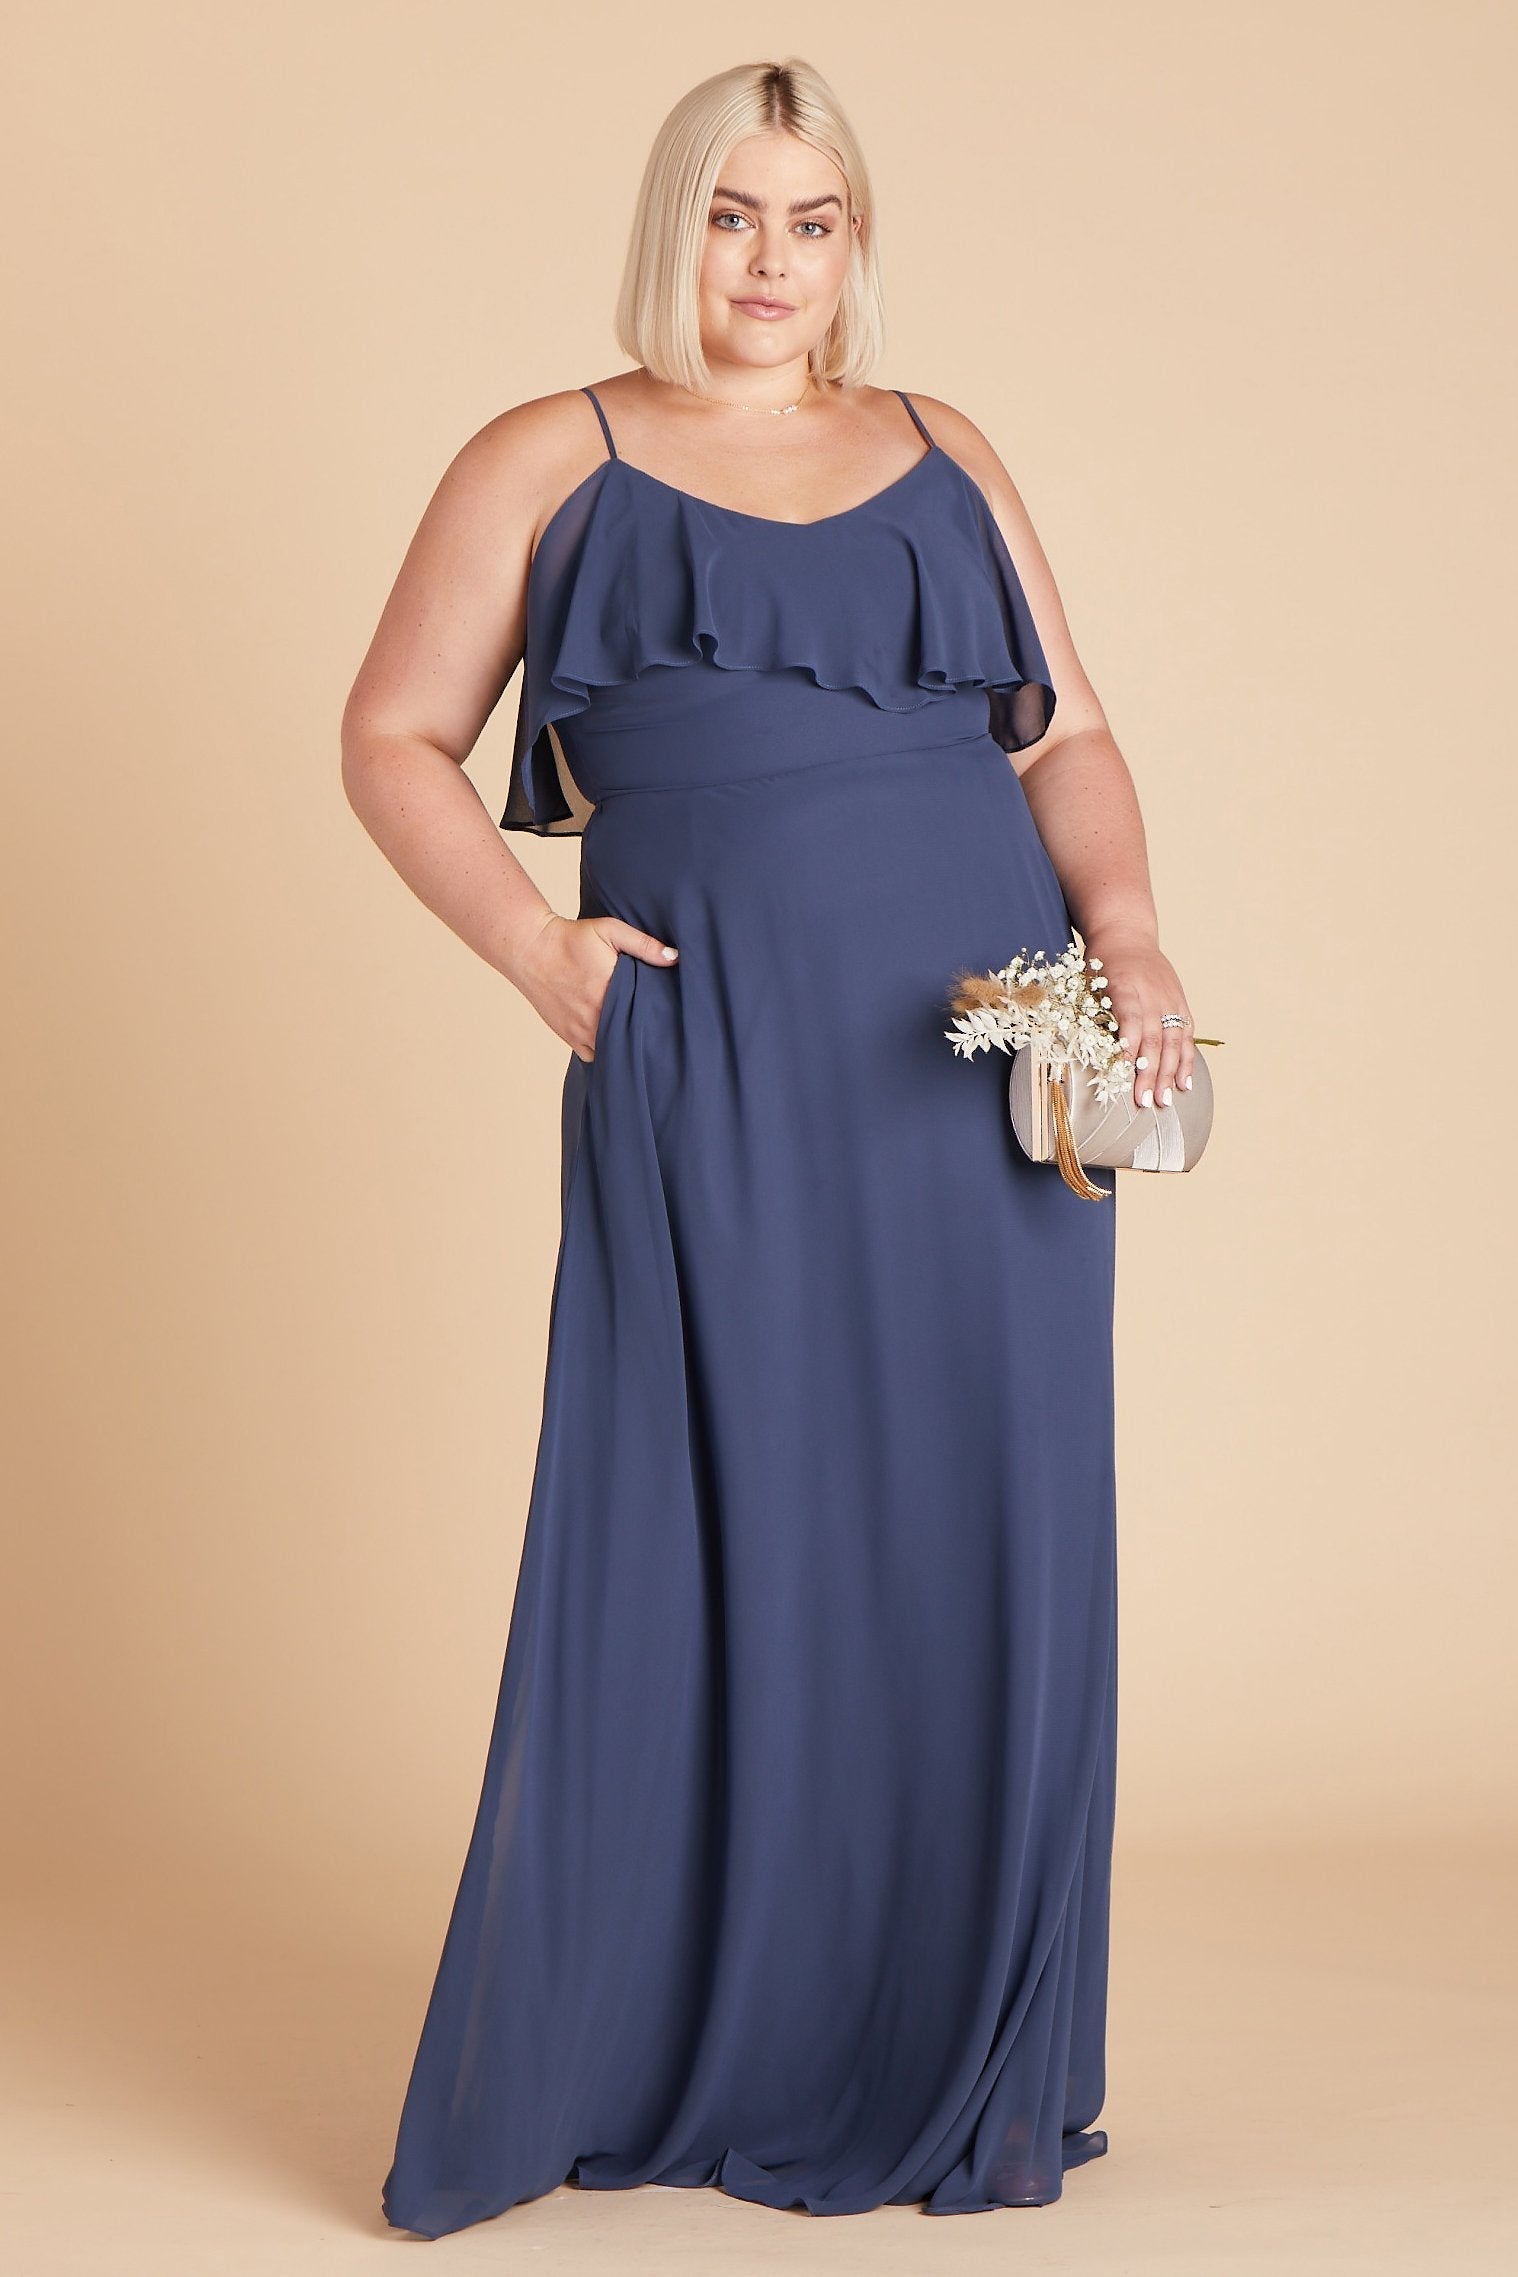 Jane convertible plus size bridesmaid dress in slate blue chiffon by Birdy Grey, front view with hand in pocket